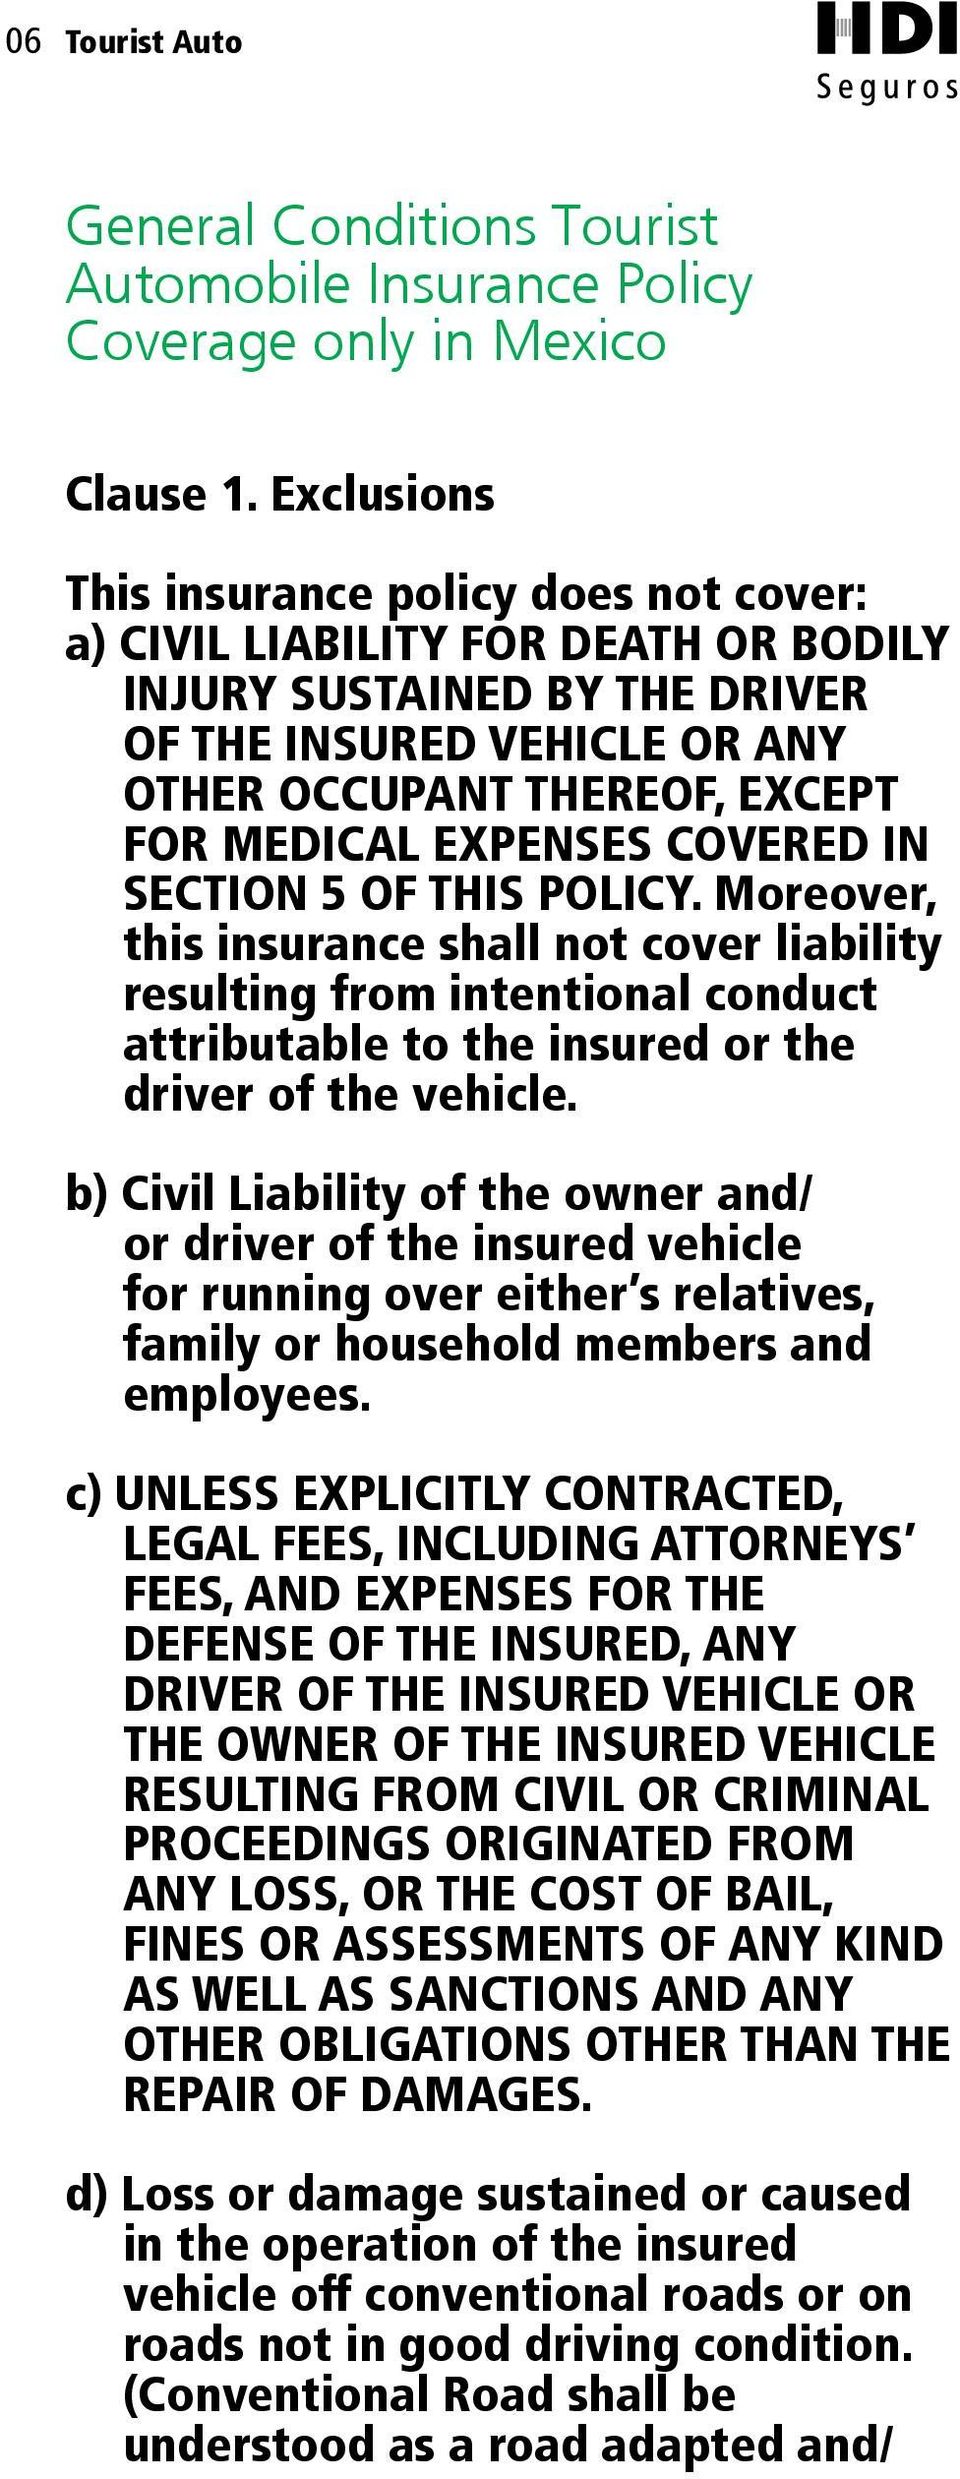 EXPENSES COVERED IN SECTION 5 OF THIS POLICY. Moreover, this insurance shall not cover liability resulting from intentional conduct attributable to the insured or the driver of the vehicle.